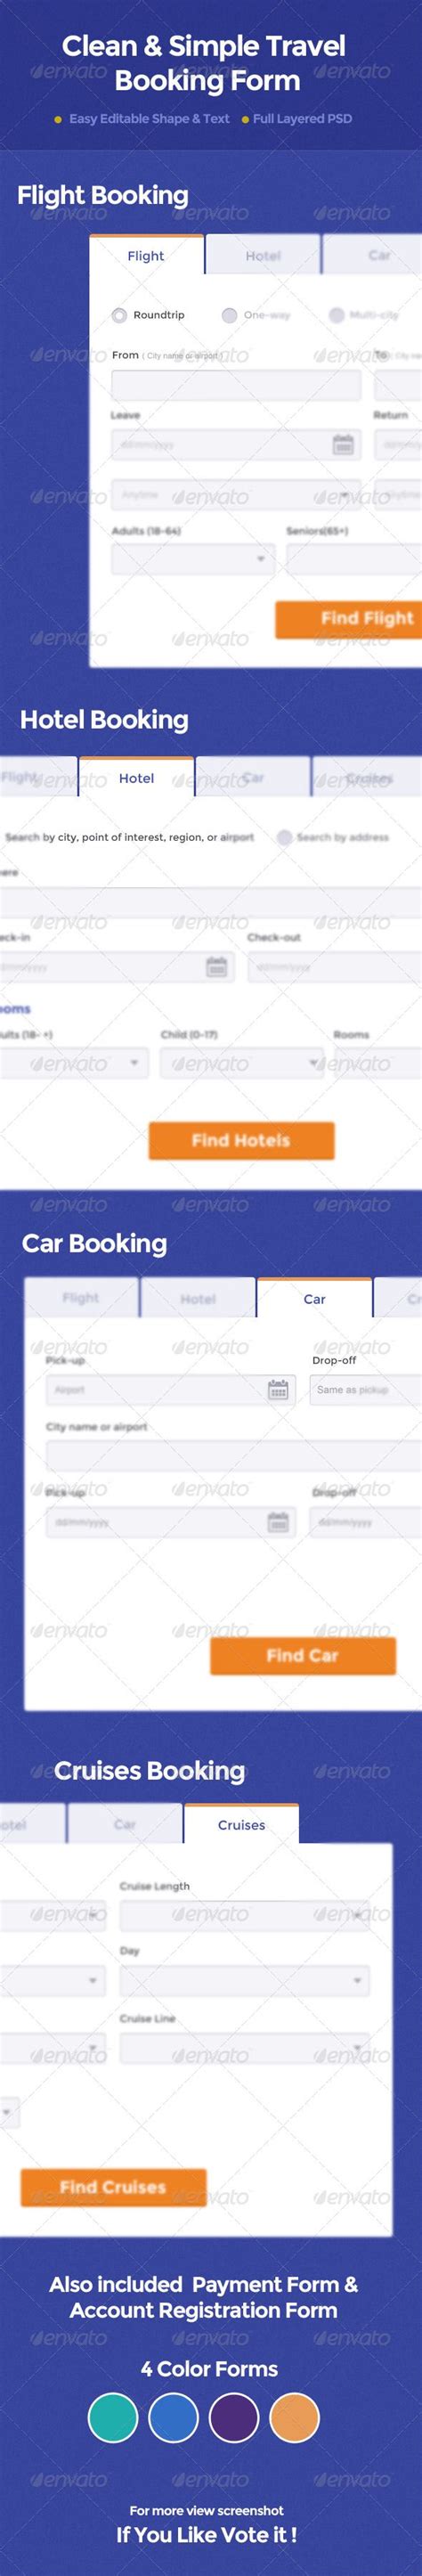 clean simple travel booking form booking booking hotel user interface design